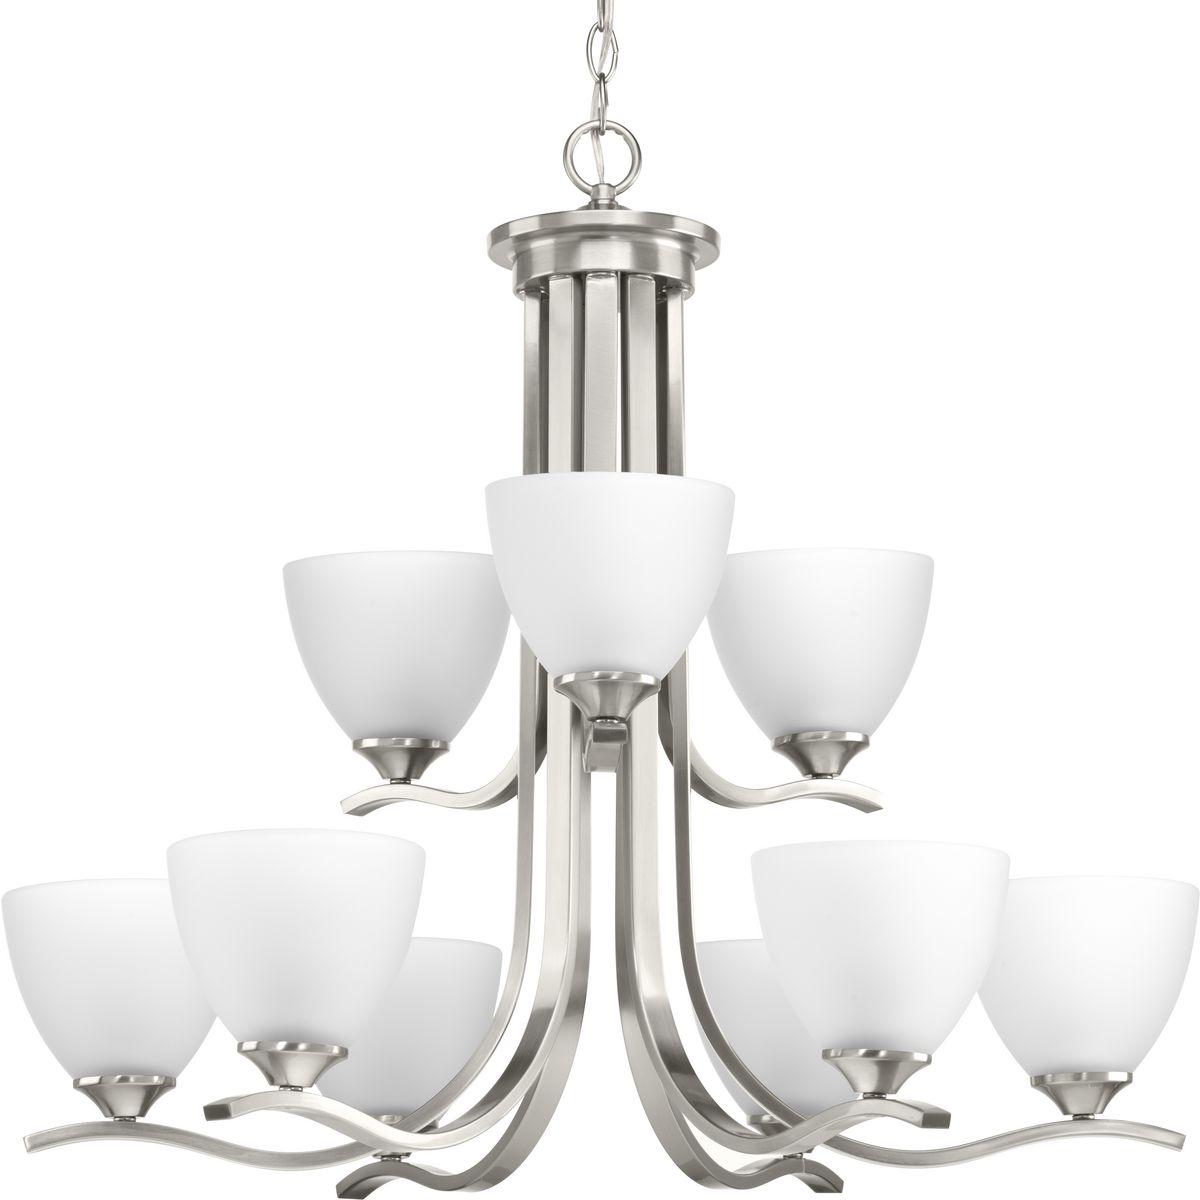 Hubbell P400064-009 The Laird collection provides a contemporary complement to casual interiors popular in today's homes. Glass shades add distinction and provide pleasing illumination to any room, while scrolling arms create an airy effect. Nine-light chandelier in an Brush